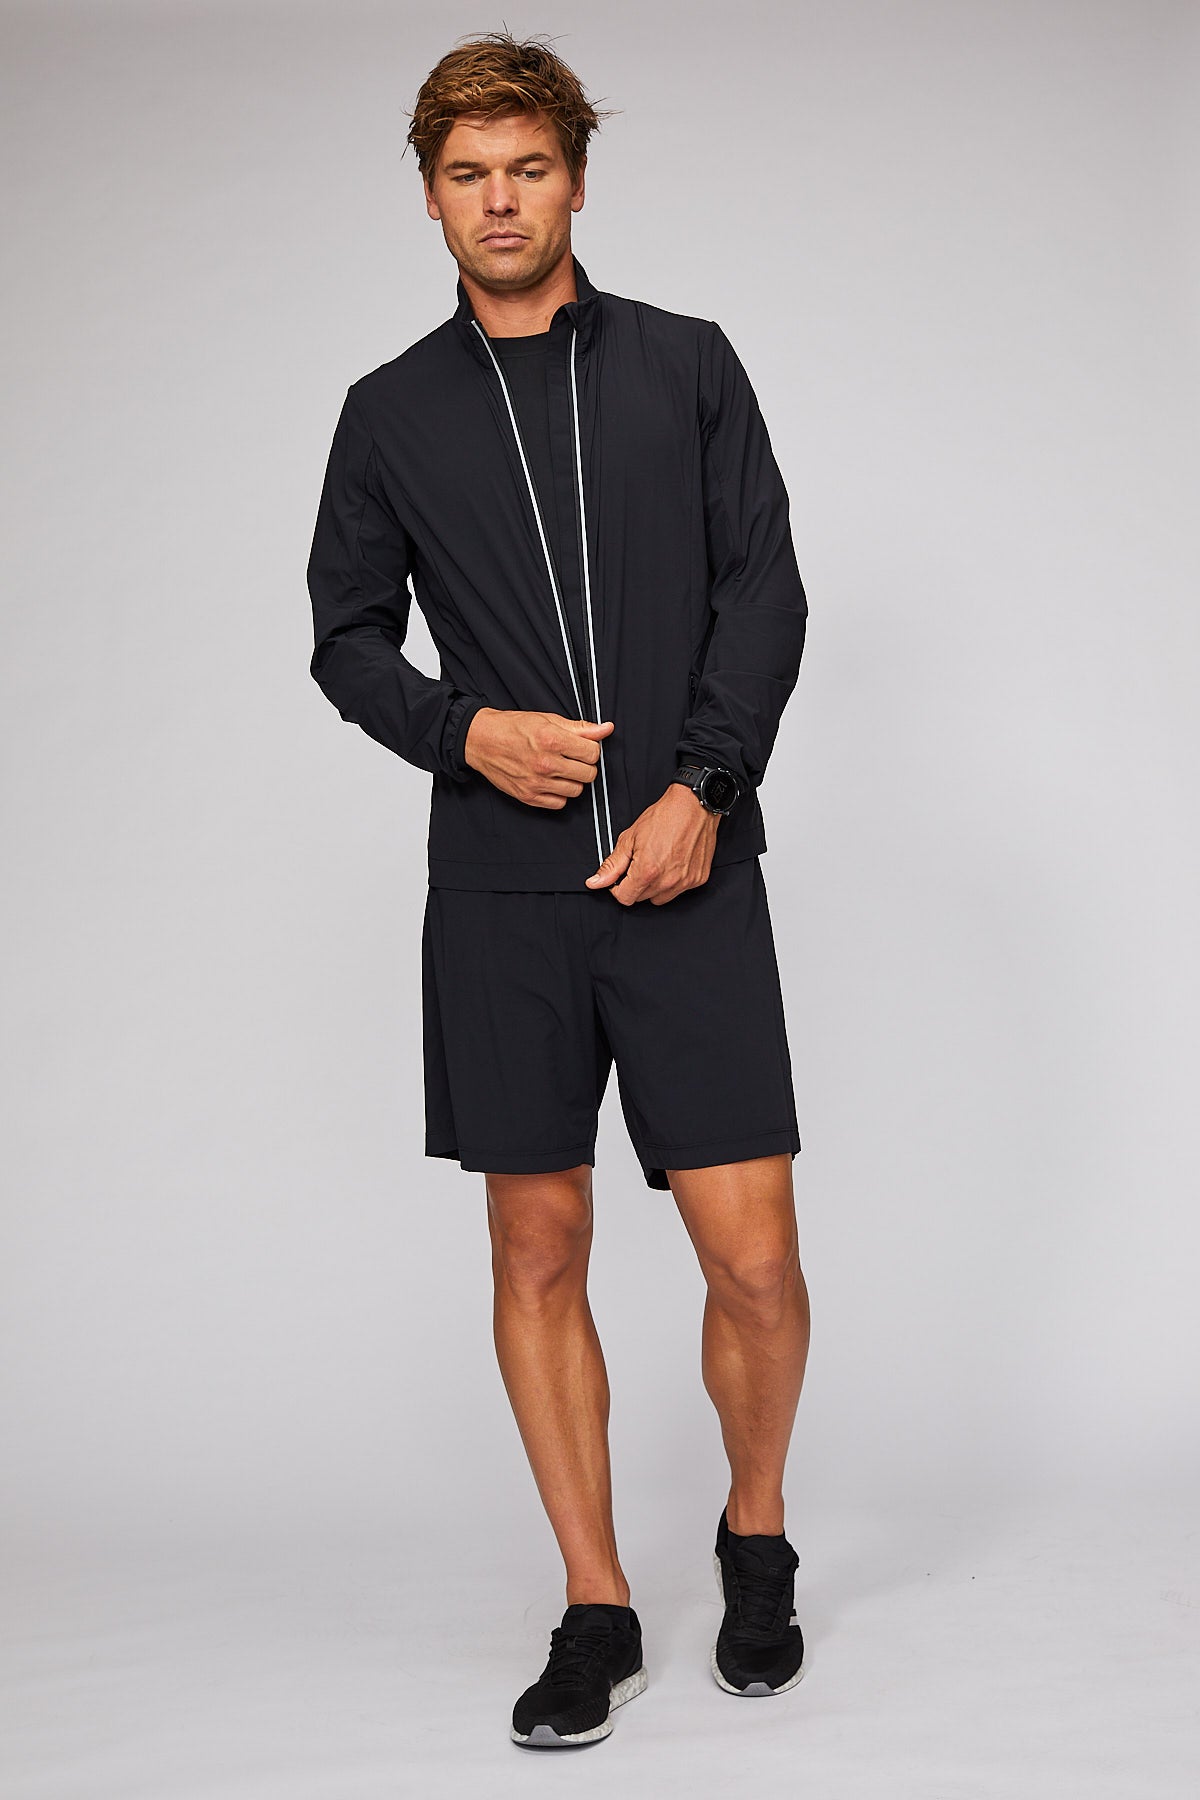 Active Quick-Drying Performance Run Jacket for Men